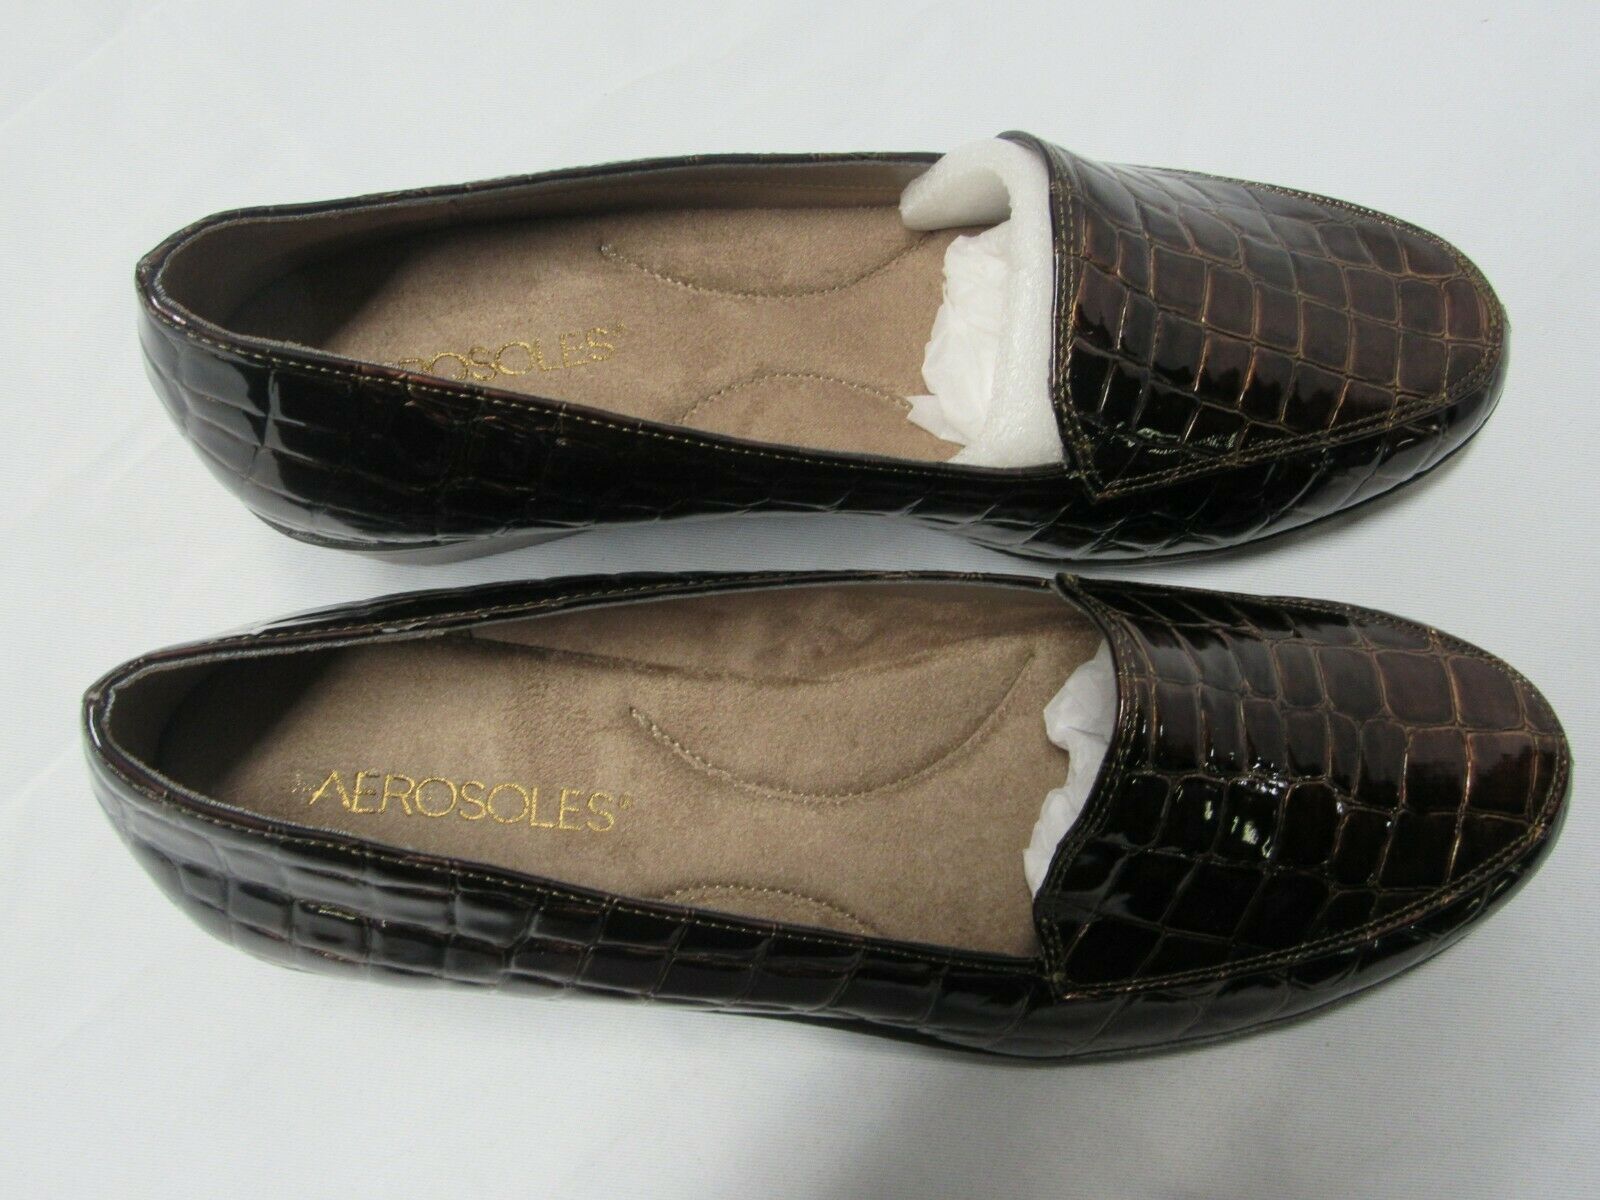 Aerosoles Wedge Loafers Size 10 Black Women's shoes New